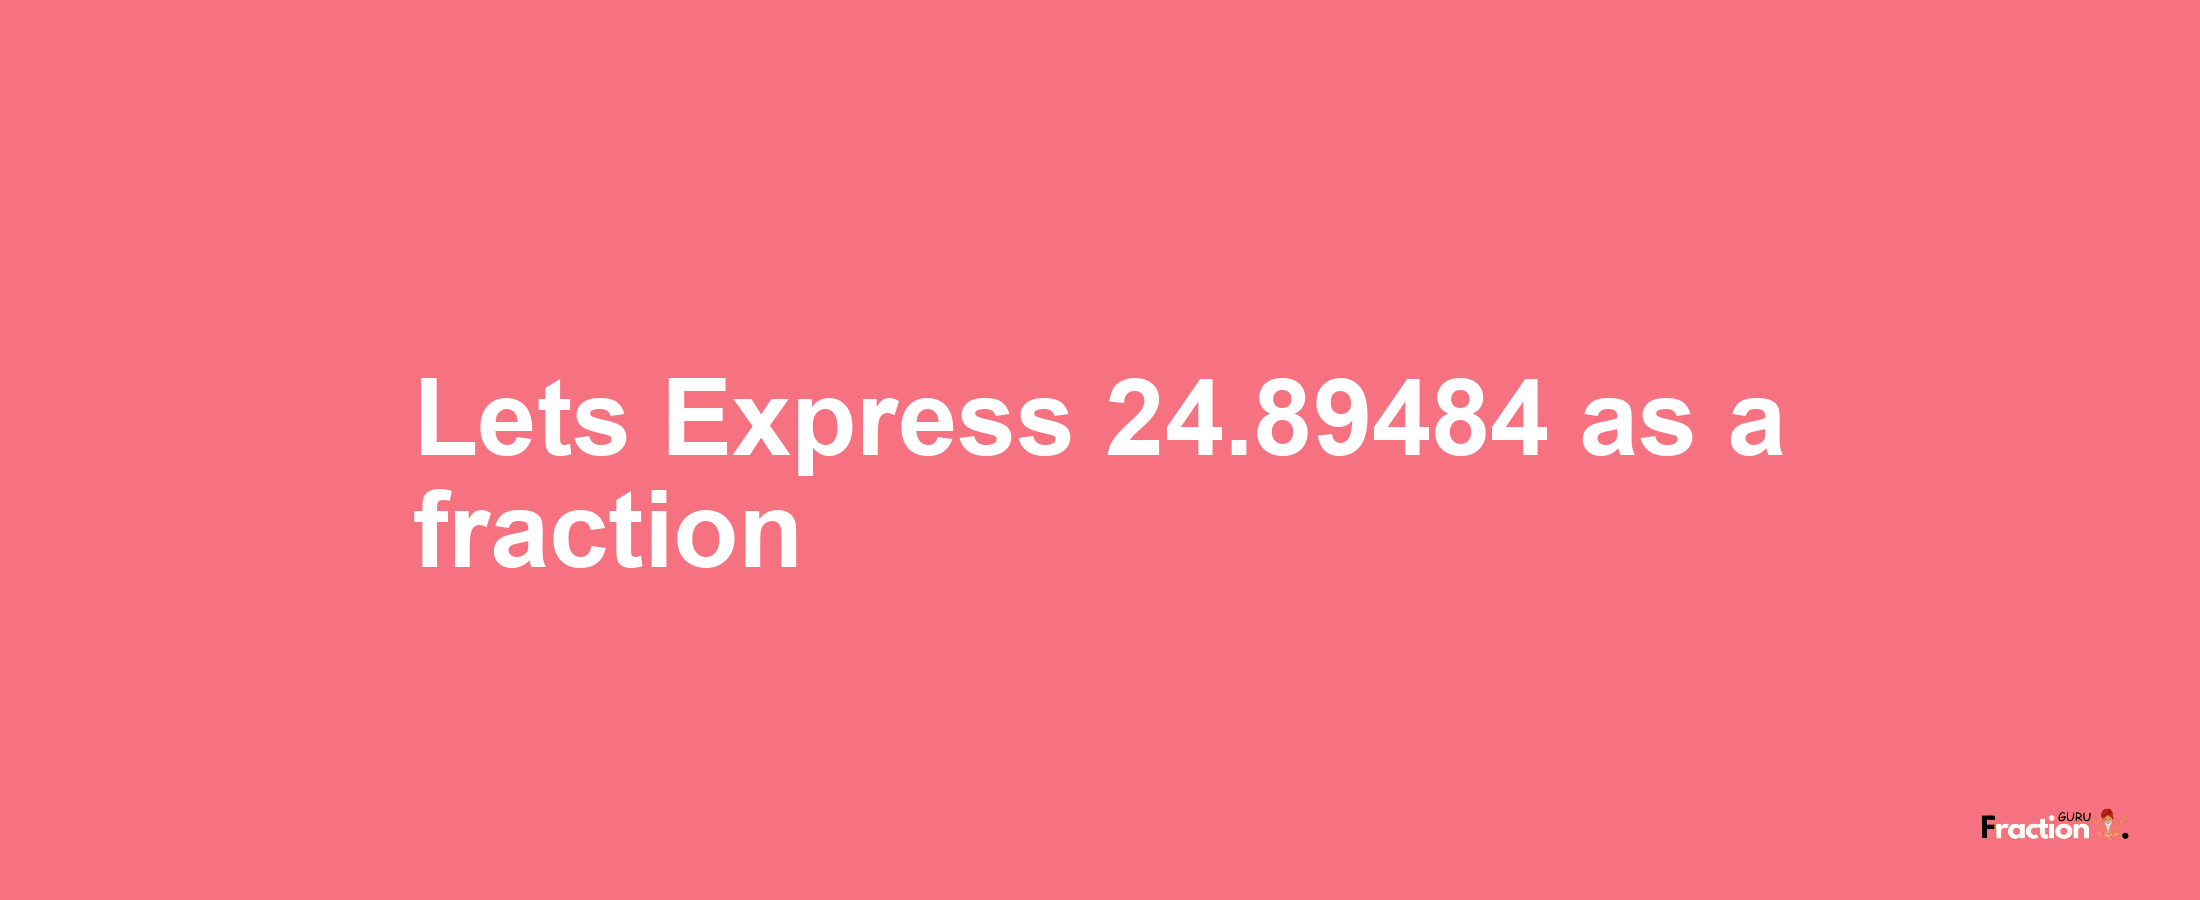 Lets Express 24.89484 as afraction